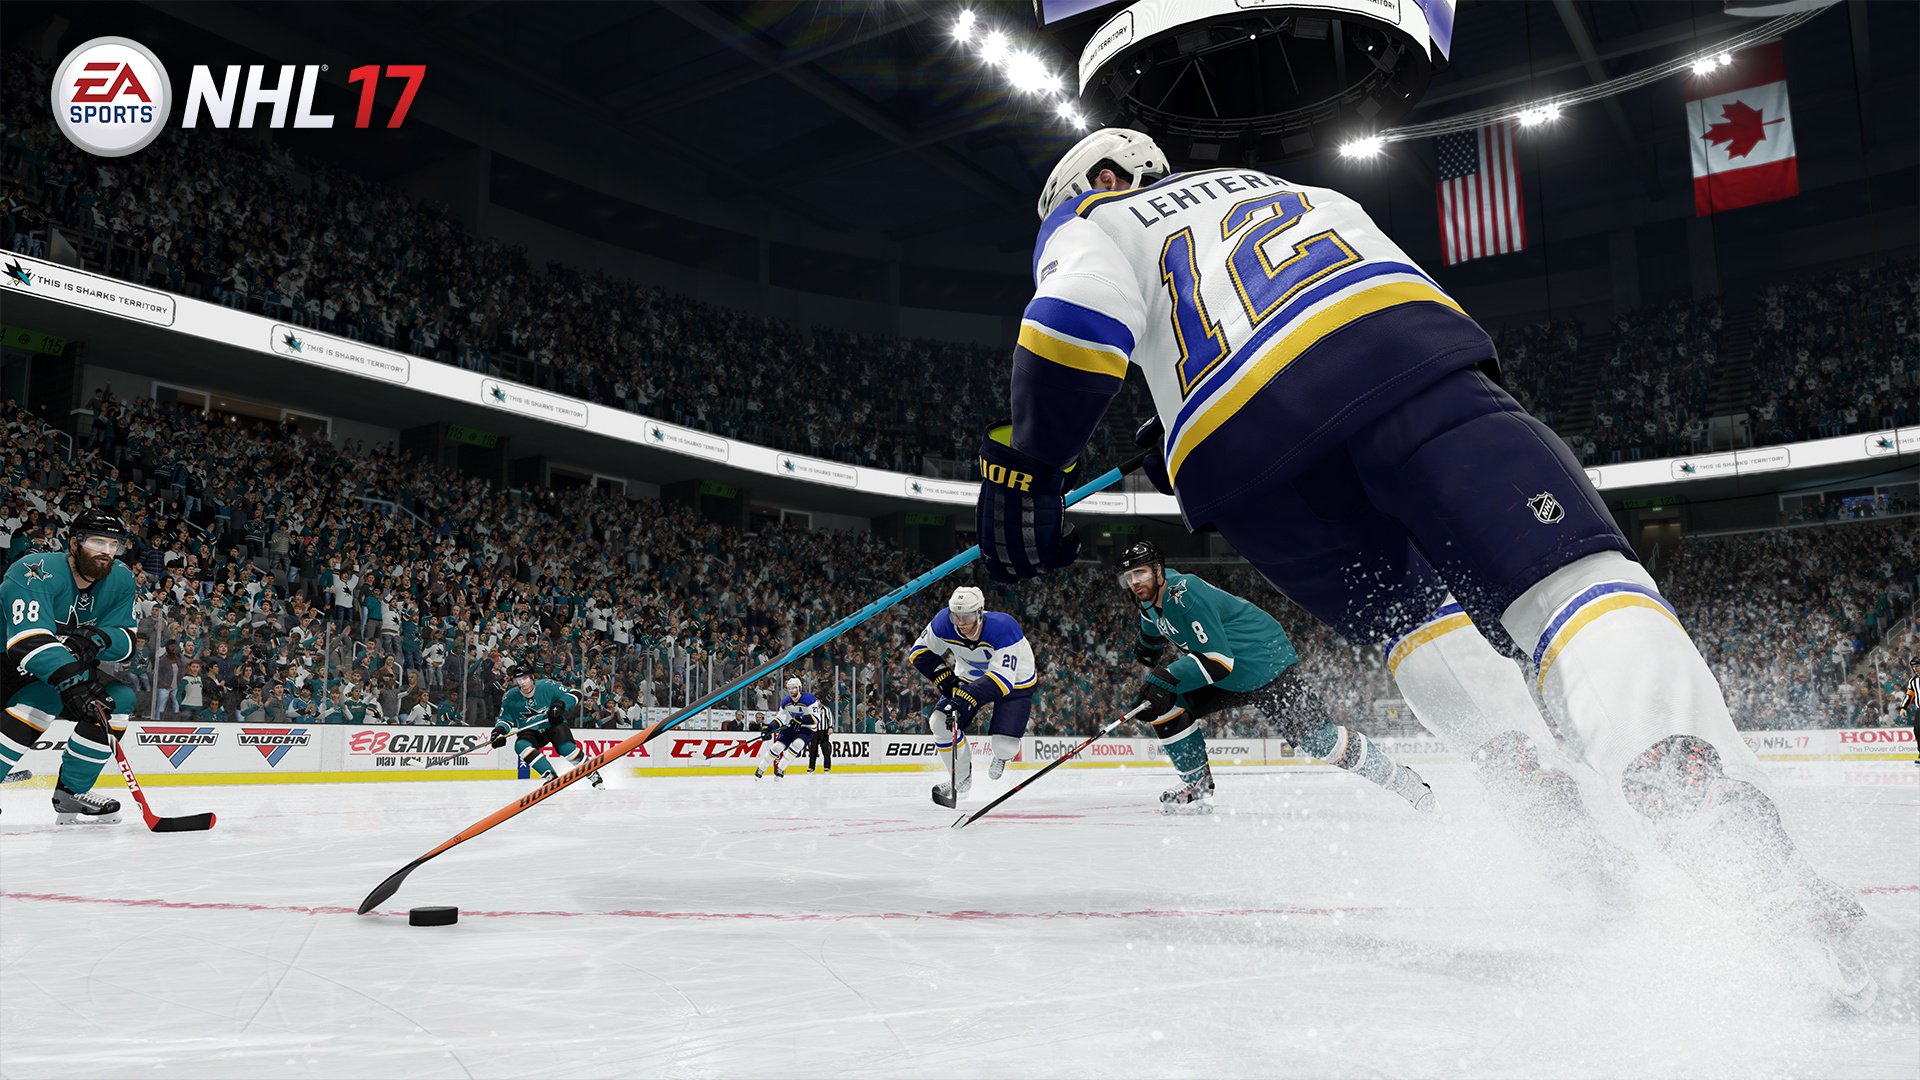 NHL 17 (PS4 / PlayStation 4) Game Profile | News, Reviews, Videos ...
